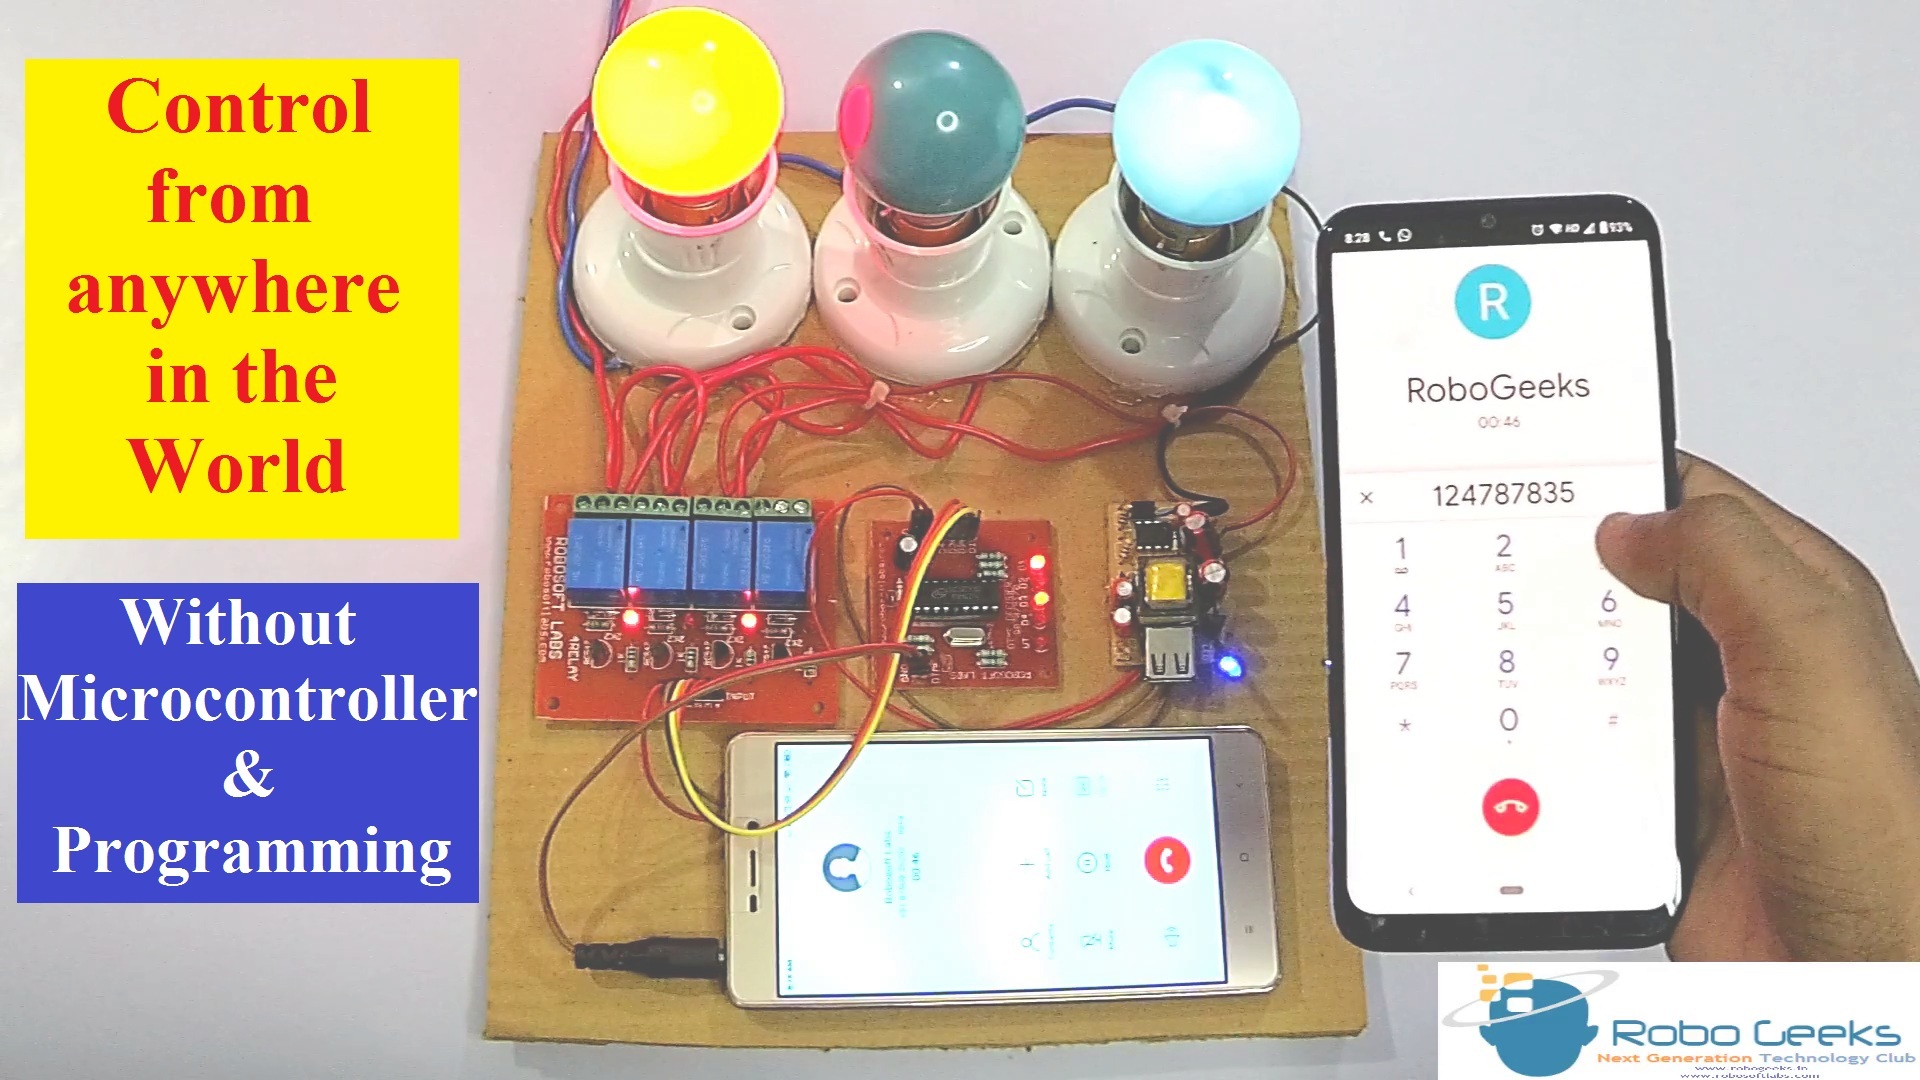 How to Make Mobile Home Automation | DTMF | Without Microcontroller and Programming | Robogeeks